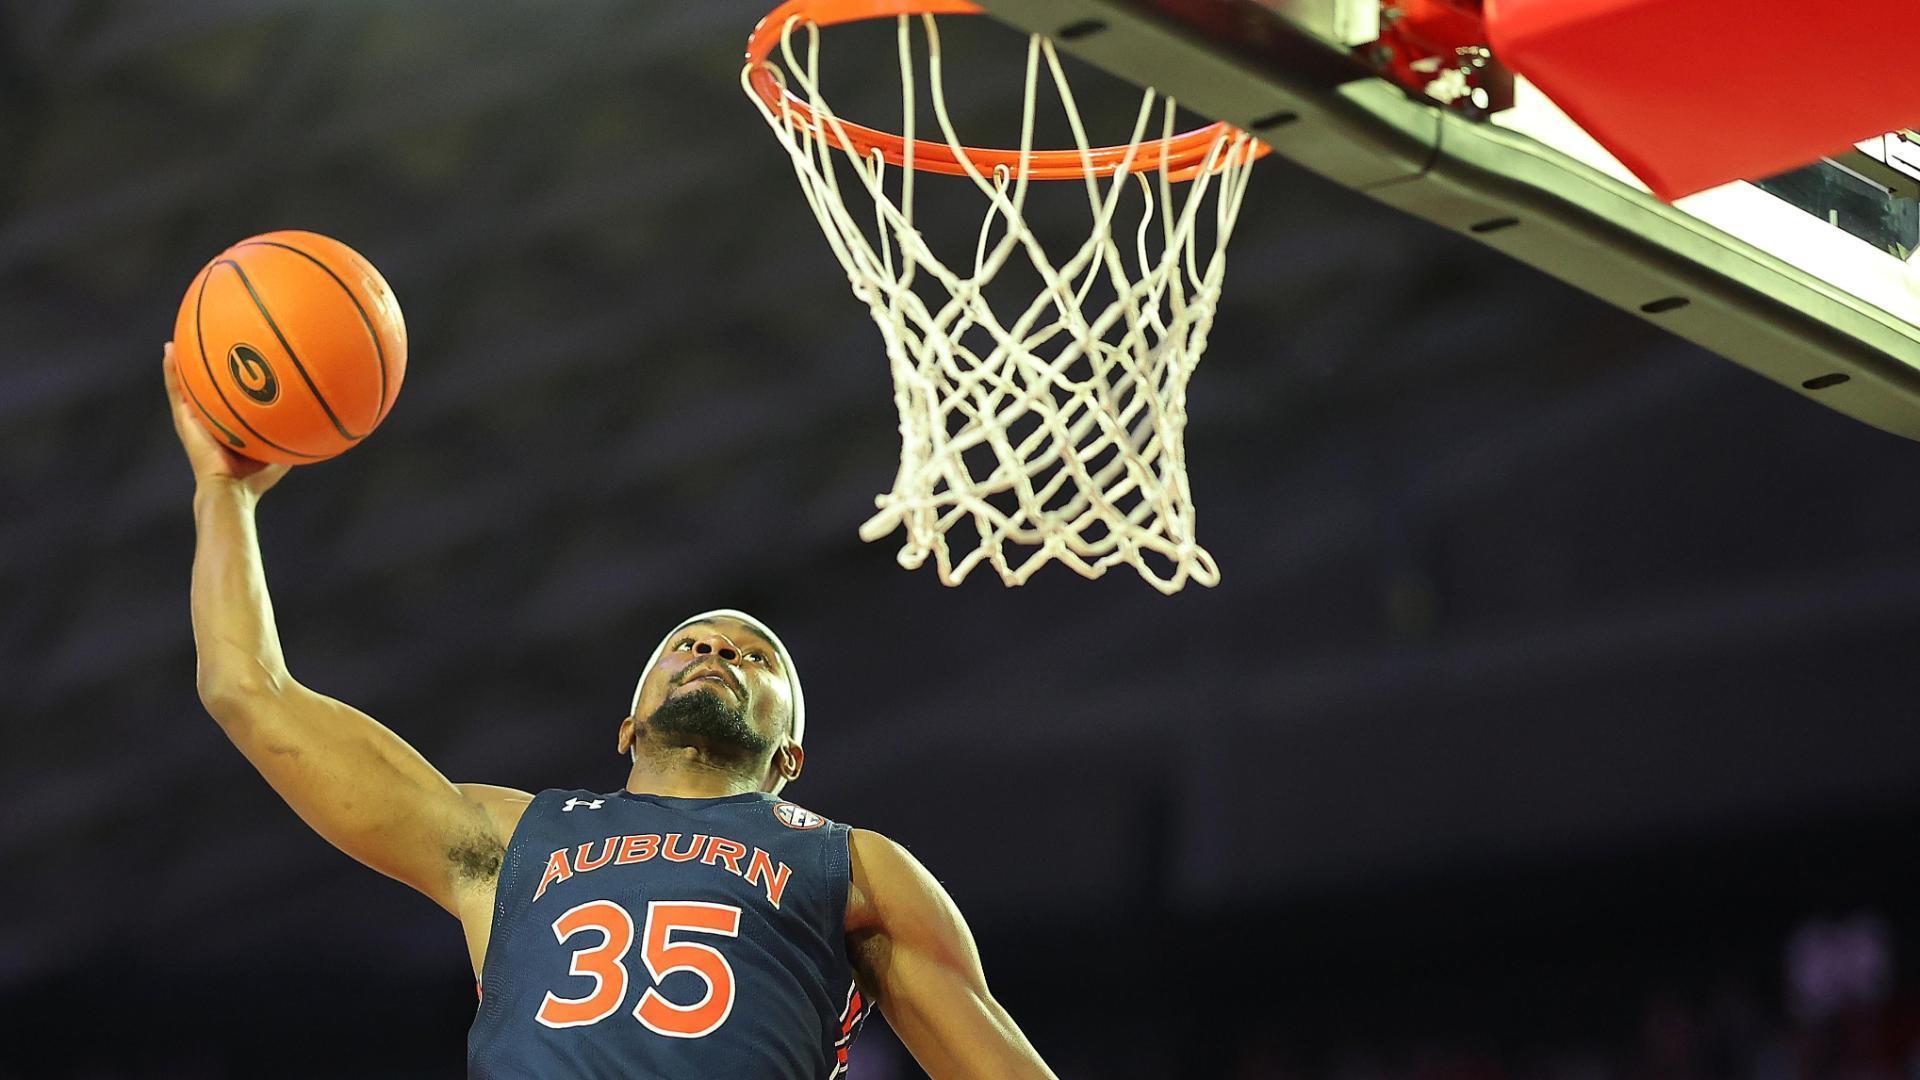 The best plays from the week in college basketball